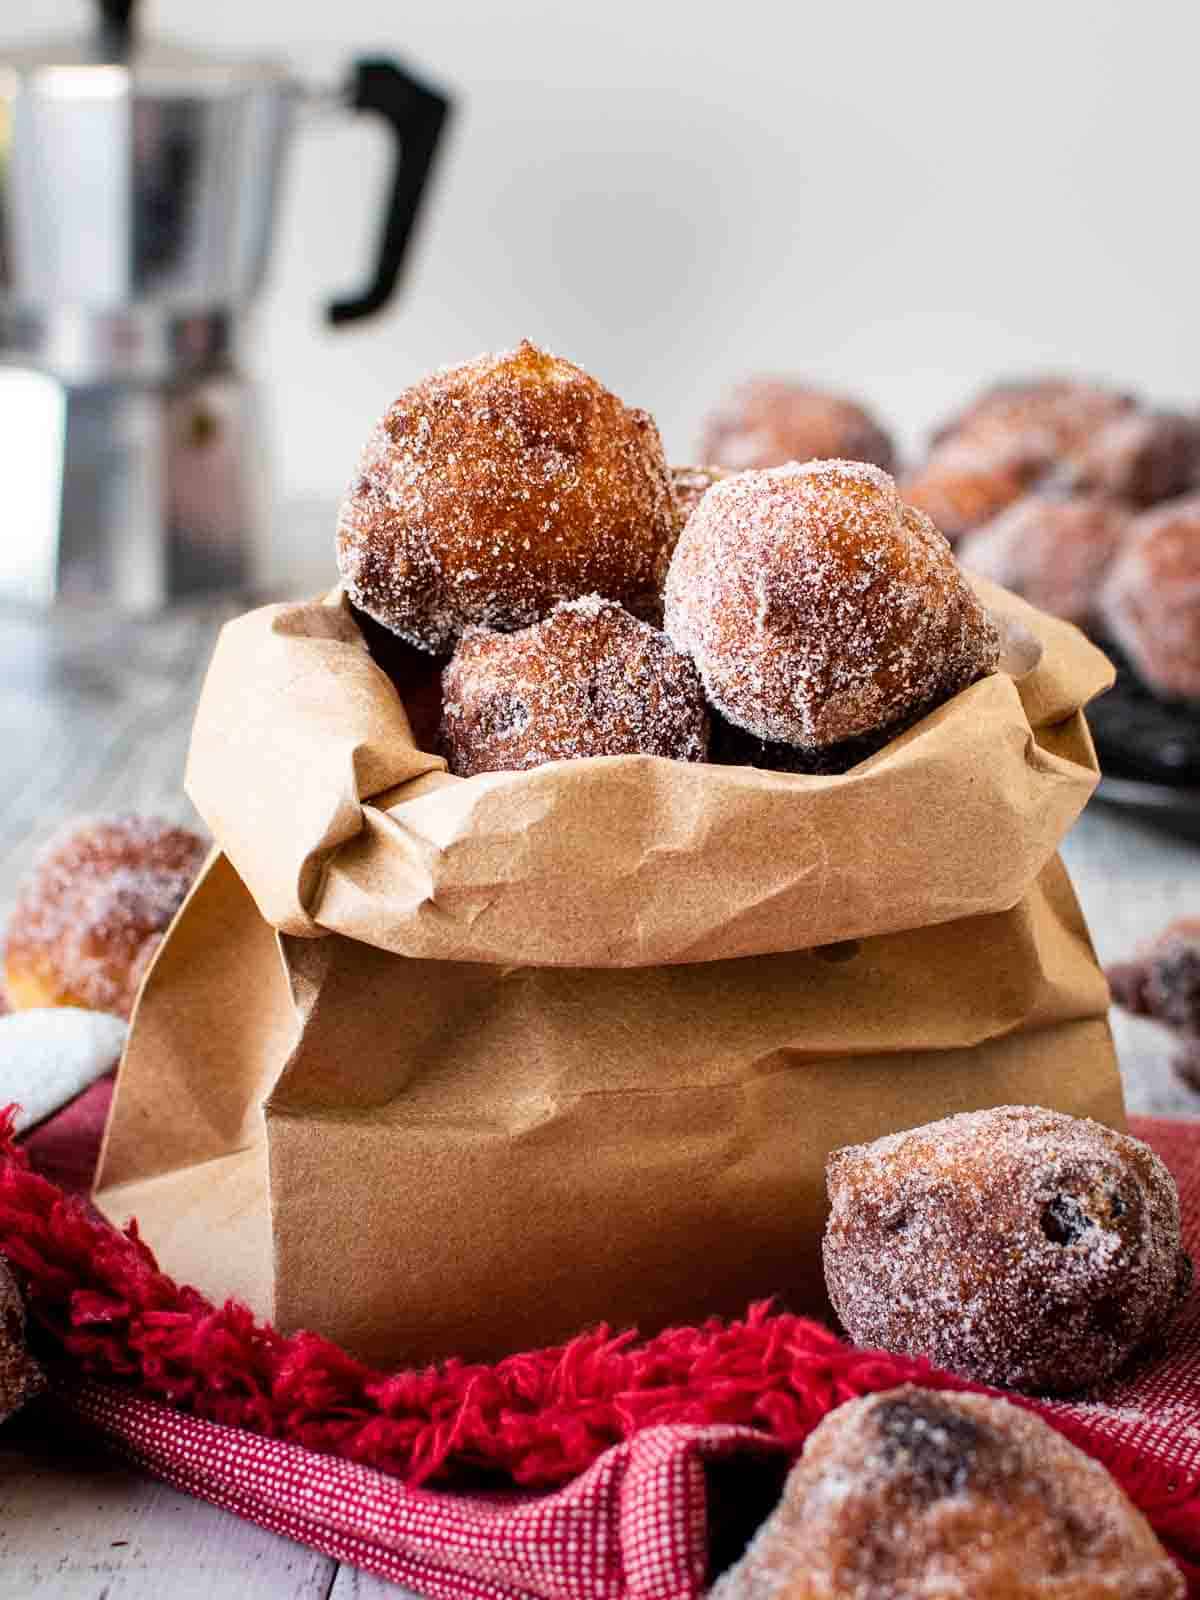 Frittelle coated in sugar in a brown paper bag.